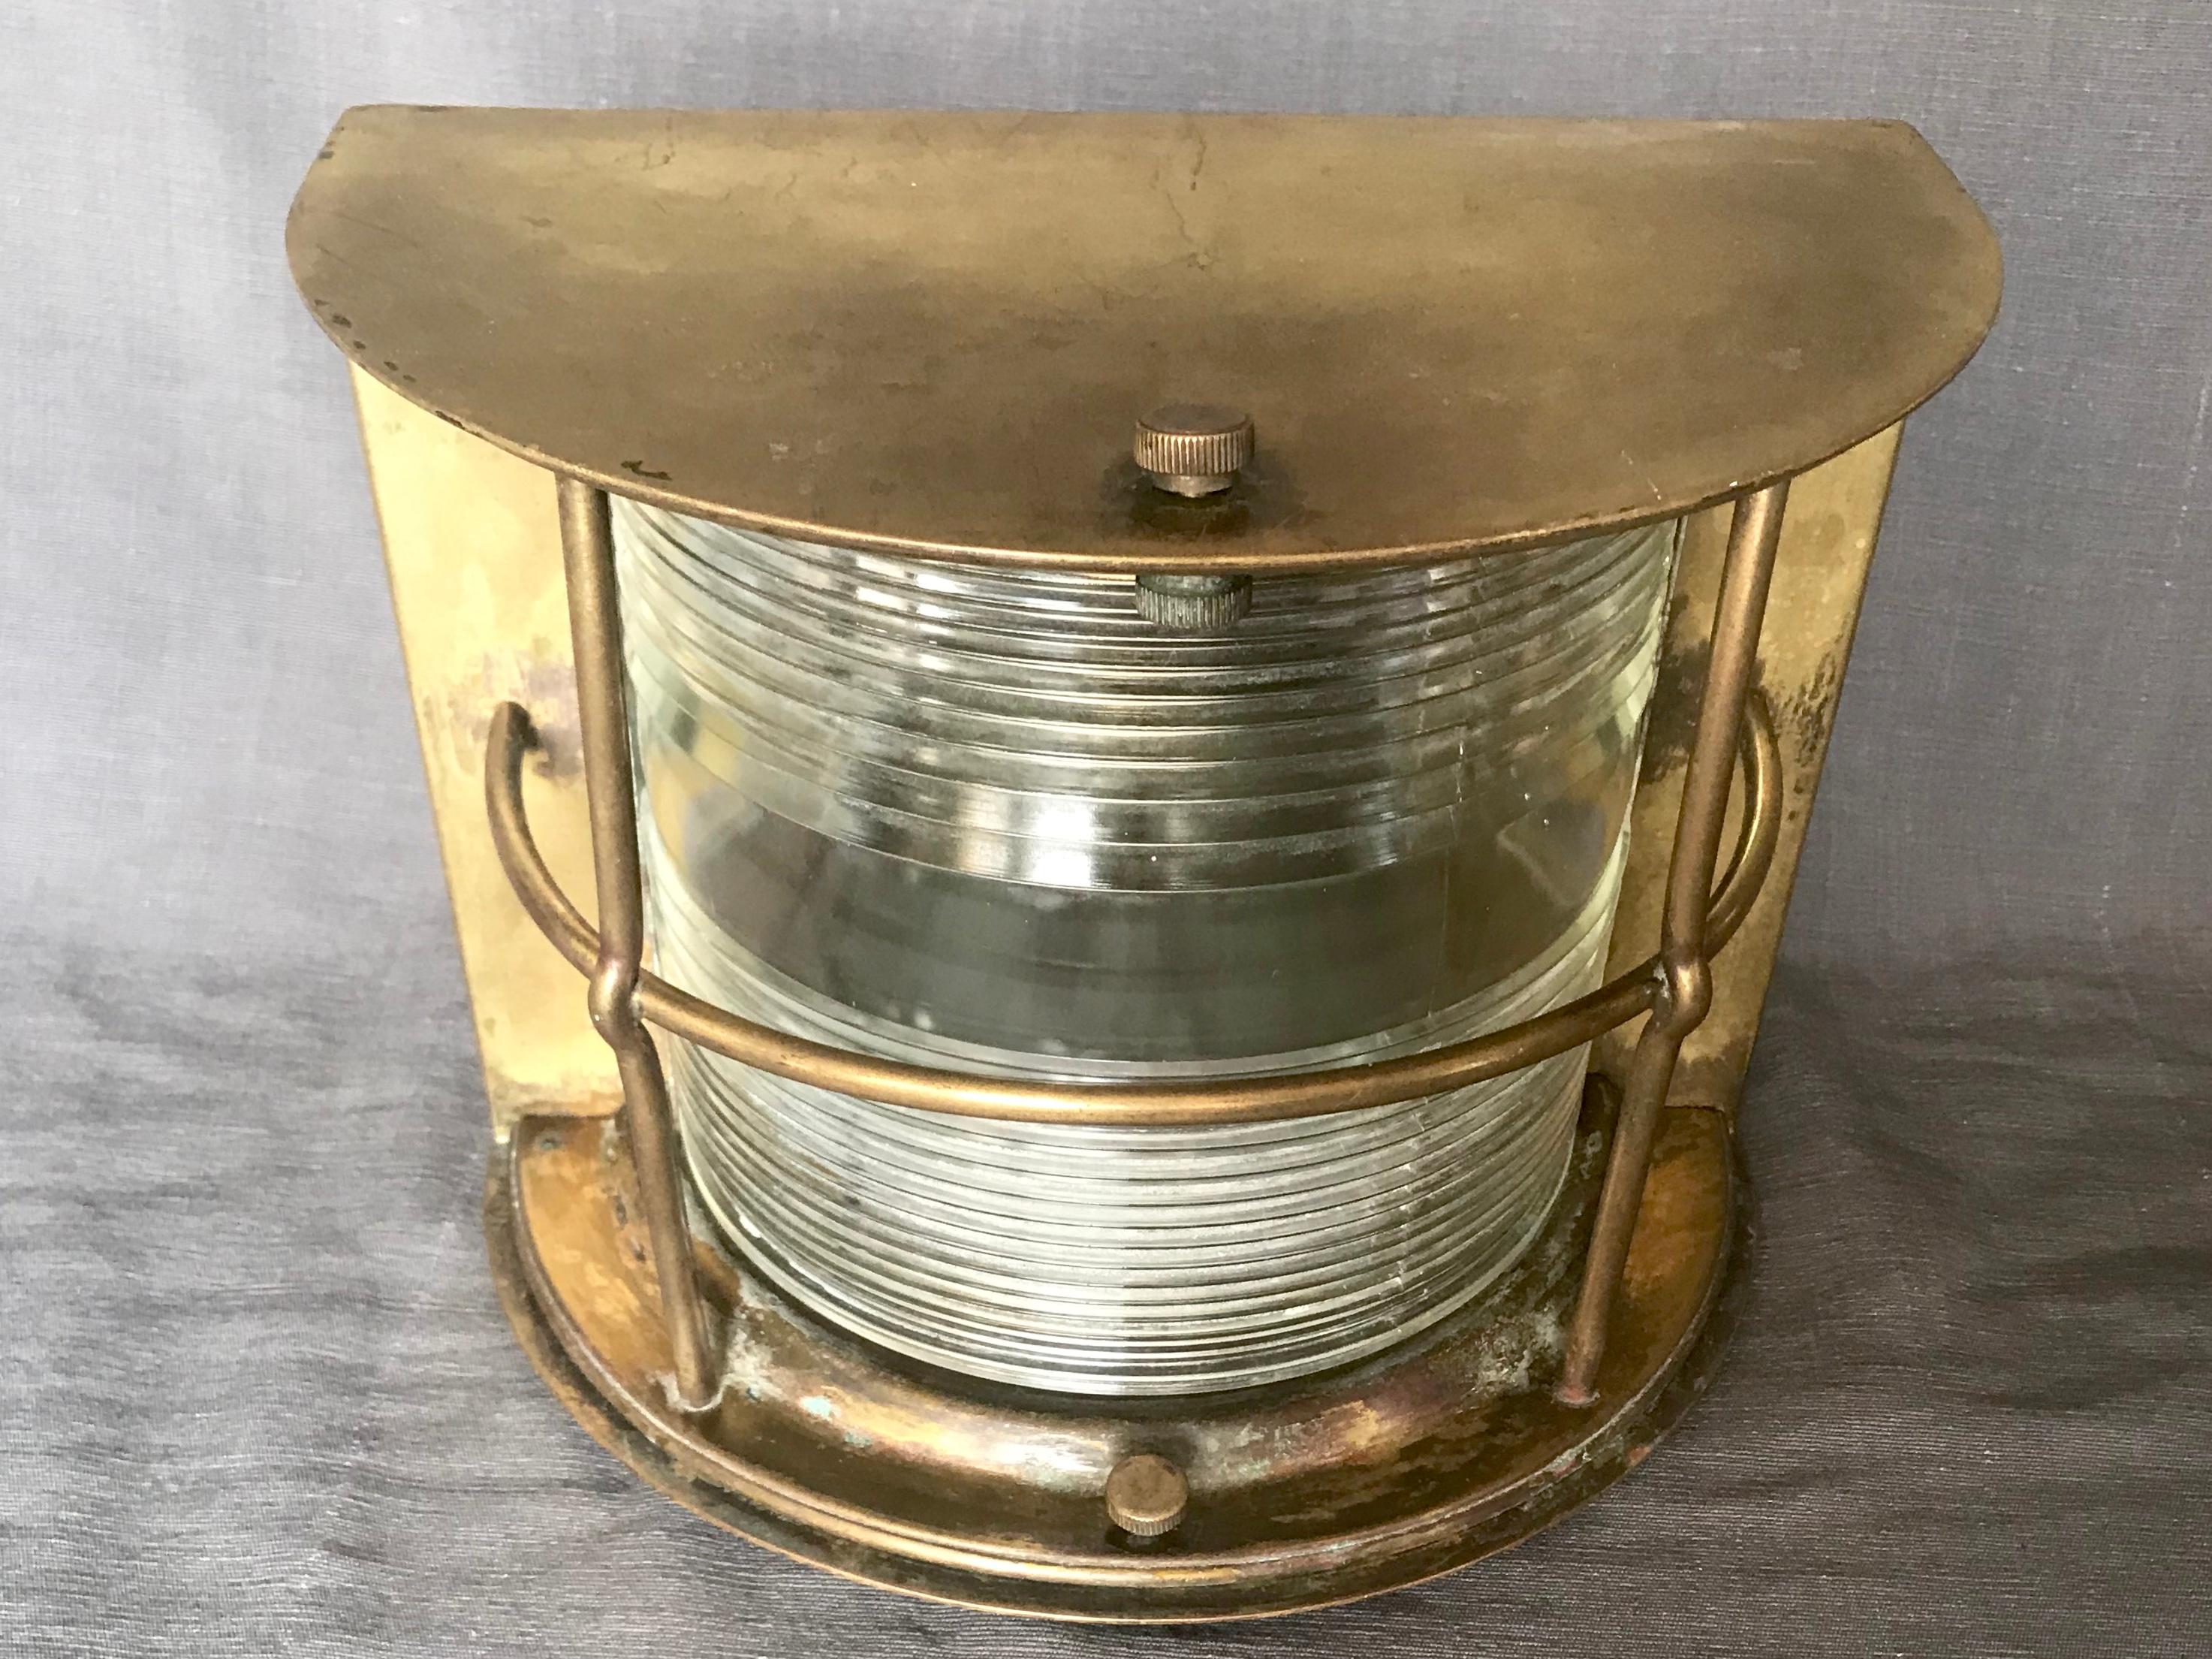 Italian brass ship lamp. Vintage nautical brass convex ship lamp / sconce with convex ribbed Holophane glass shade; with original patina and newly rewired.
Italy, 1940s
Dimensions: 9.25